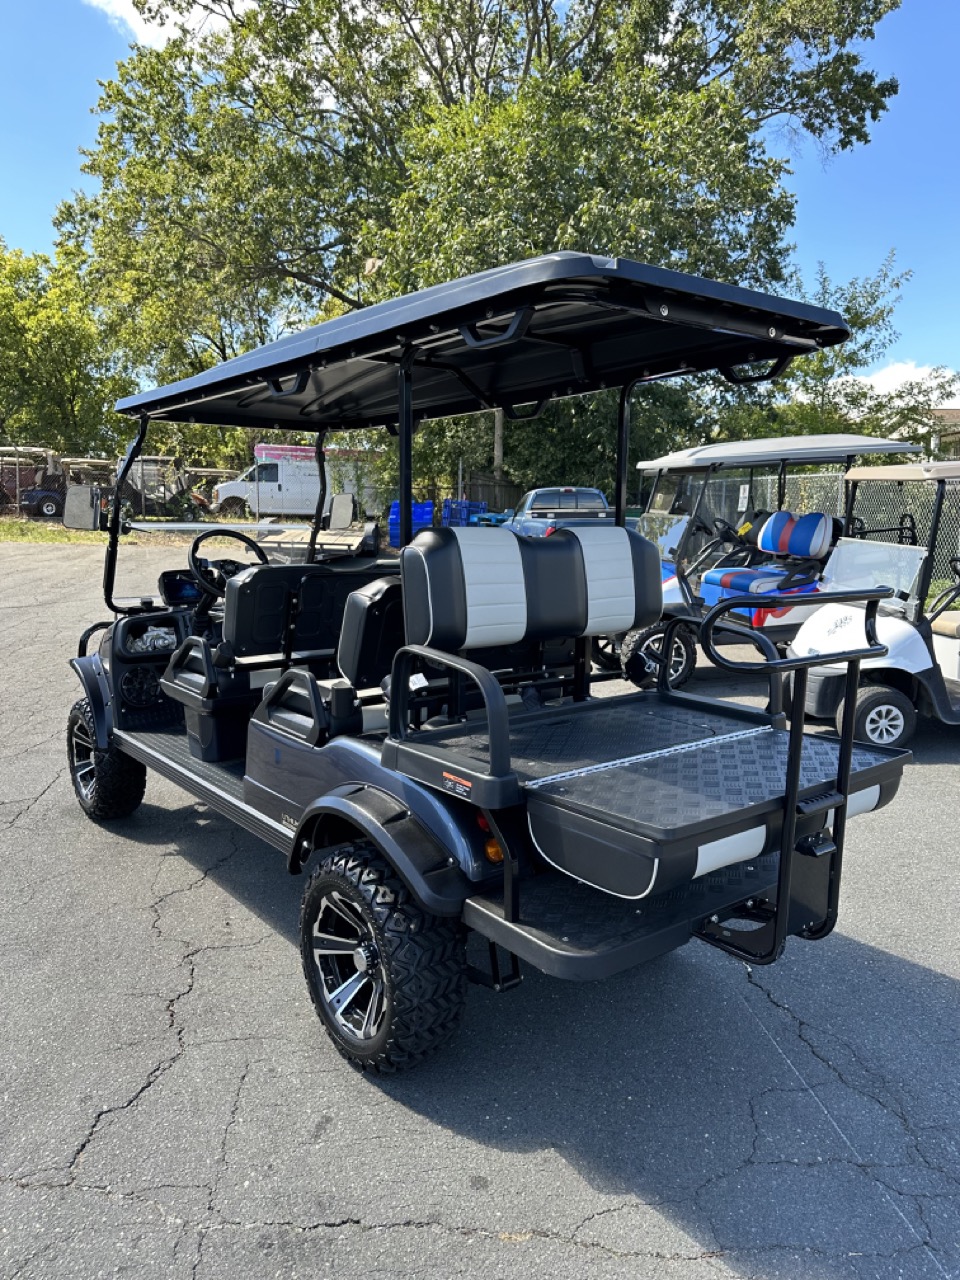 2024 Arctic Grey LITHIUM Forester 6 PLUS Golf Cart! Street Ready! 0% ...